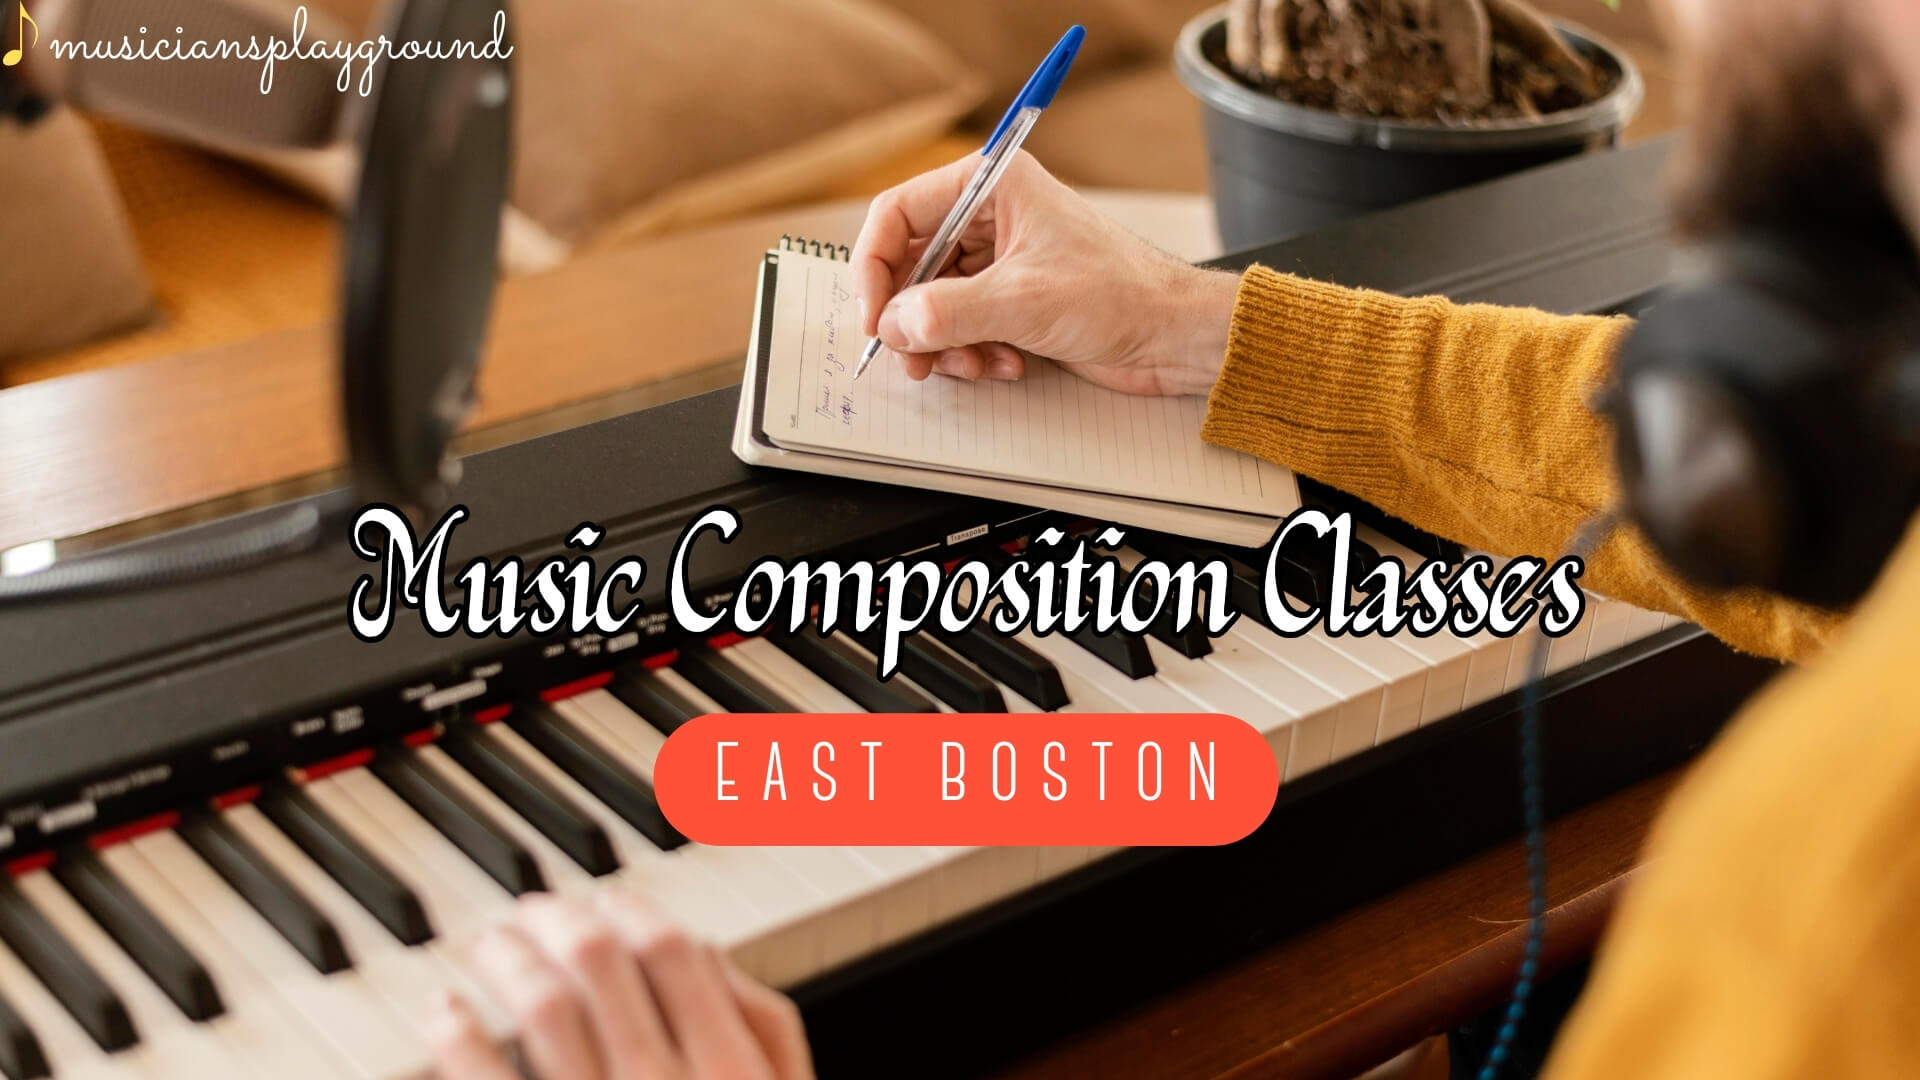 Music Composition Classes in East Boston, Massachusetts: Unlock Your Musical Potential at Musicians Playground